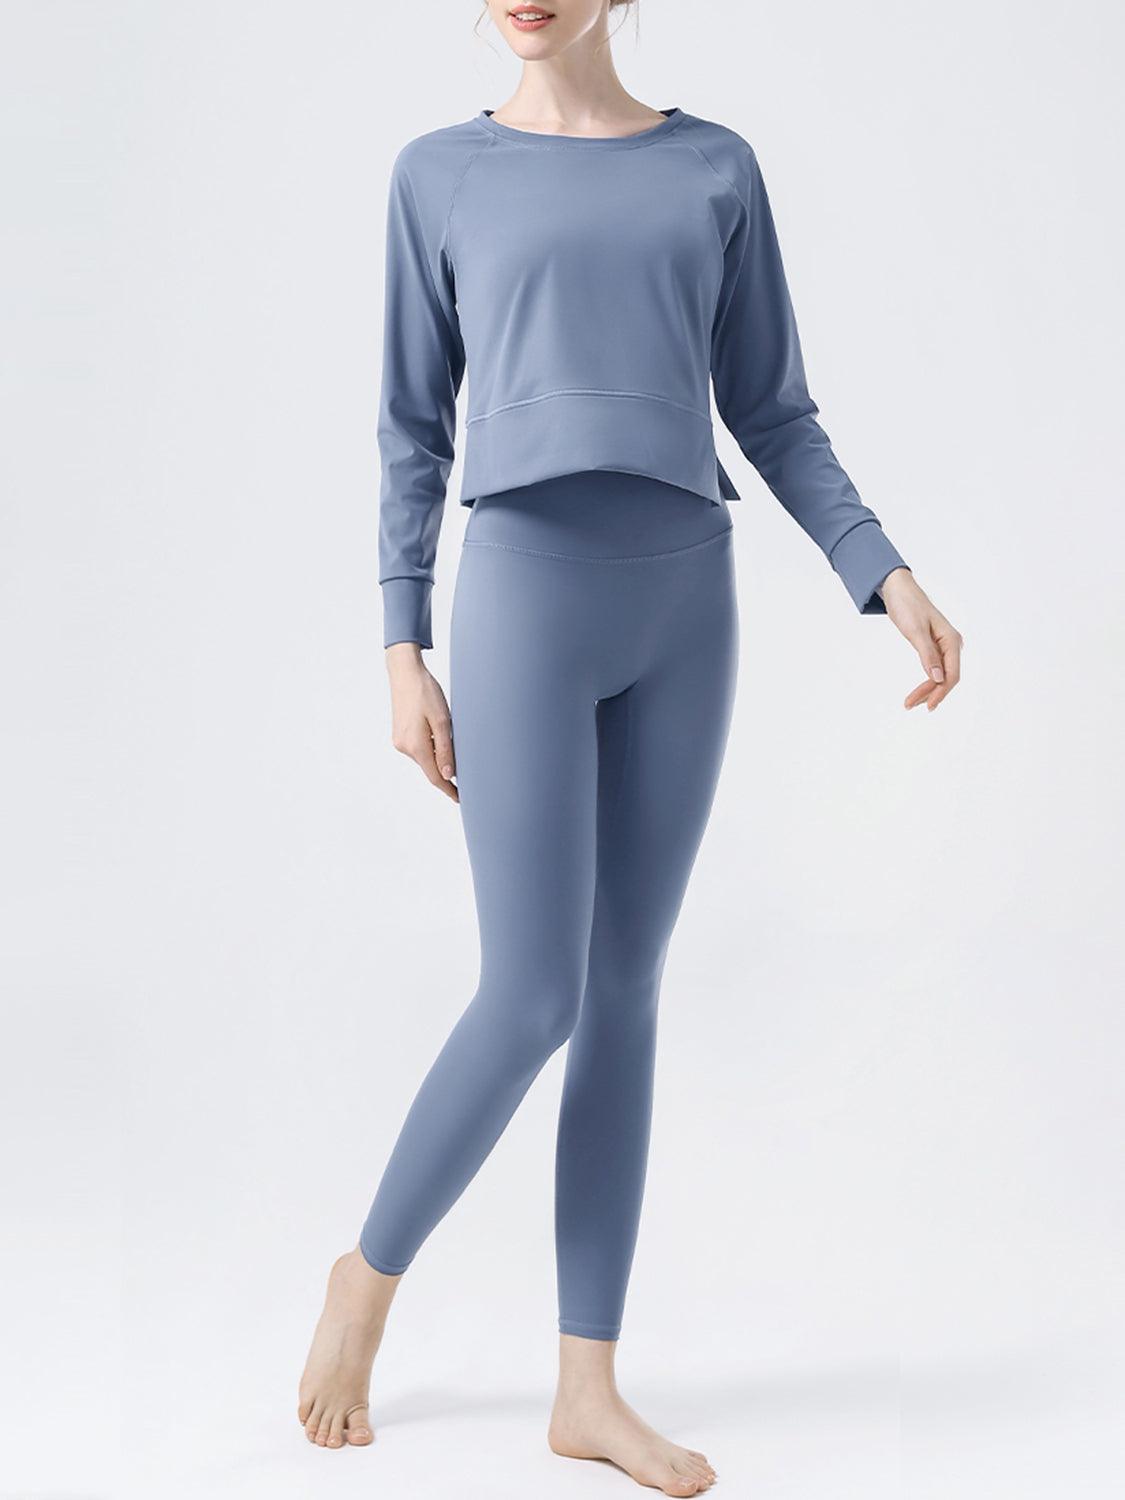 a woman in a blue top and leggings